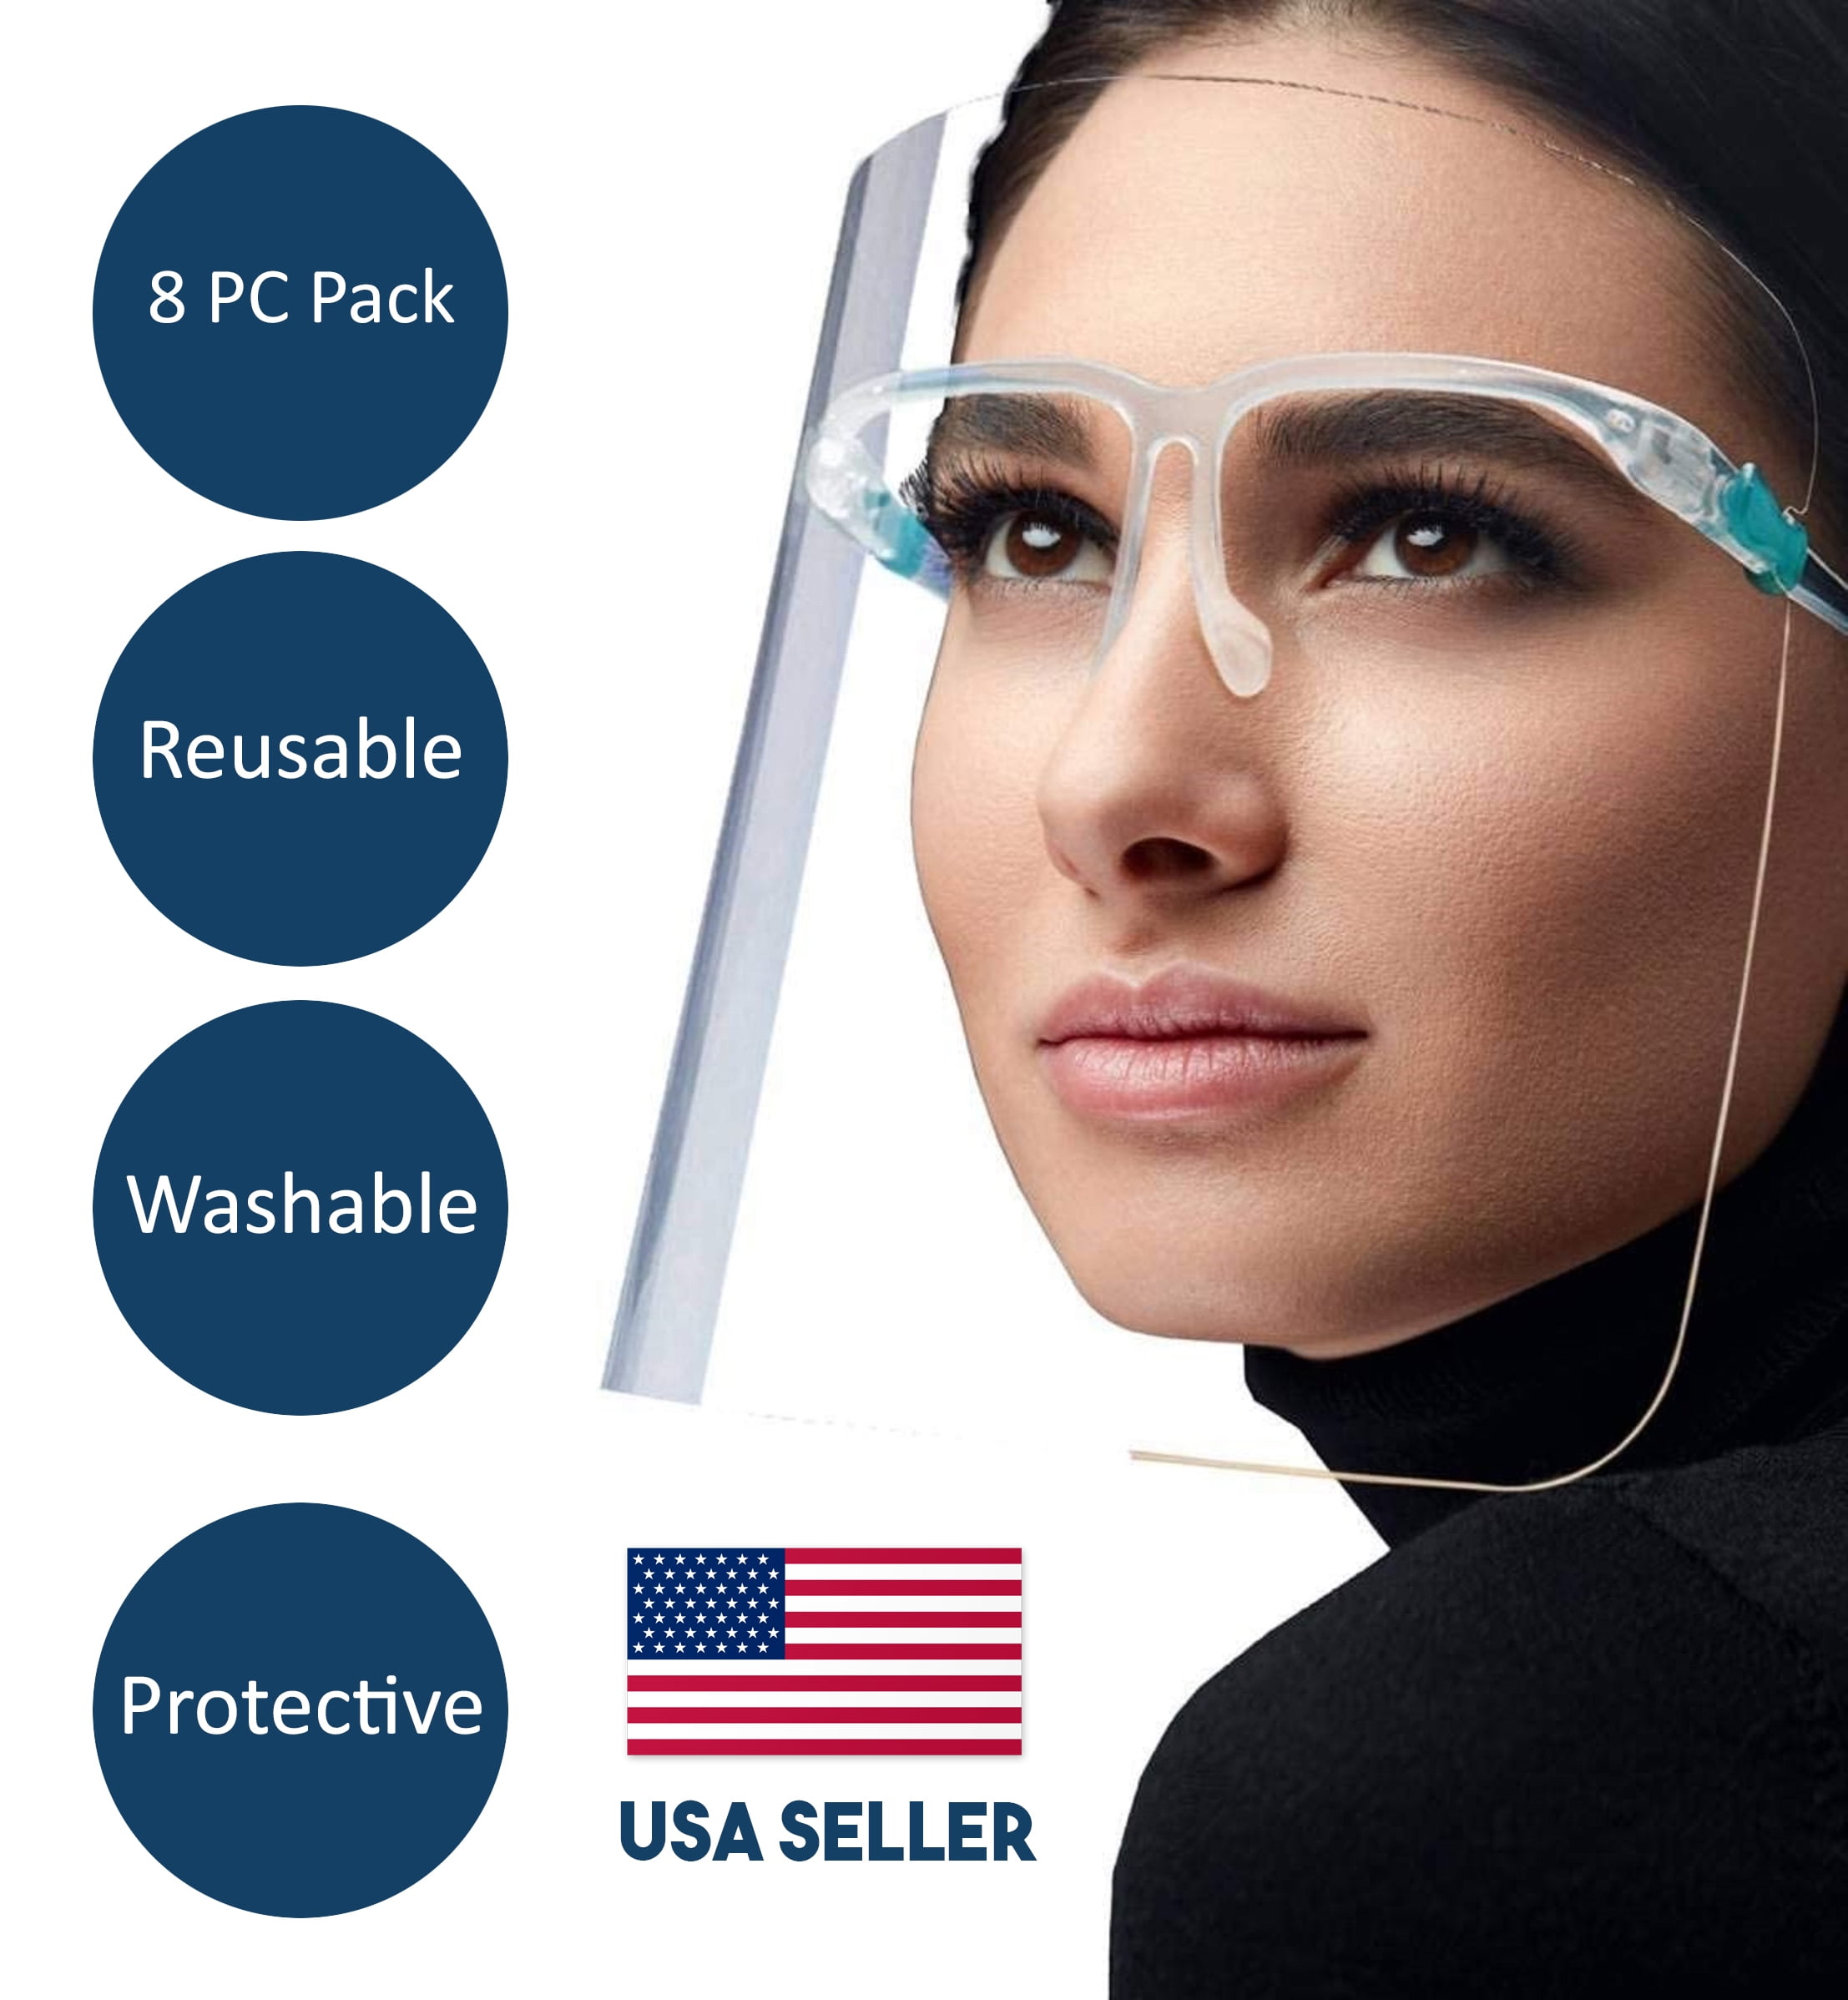 Details about   12PACK Face Shield SET Guard Mask Safety Protection With Glasses Reusable 